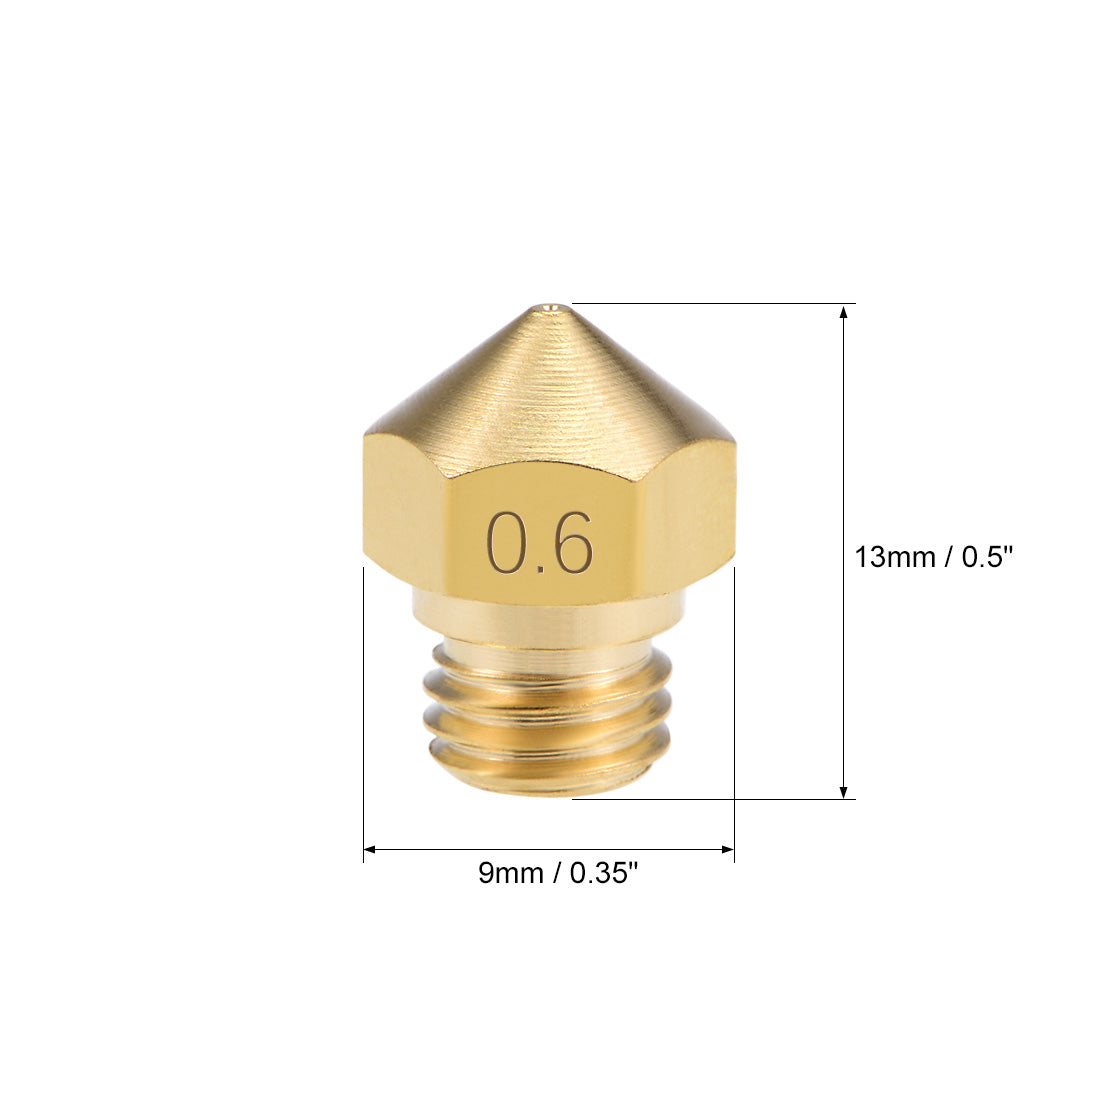 uxcell Uxcell 0.6mm 3D Printer Nozzle Head M7 for MK10 1.75mm Extruder Print, Brass 10pcs